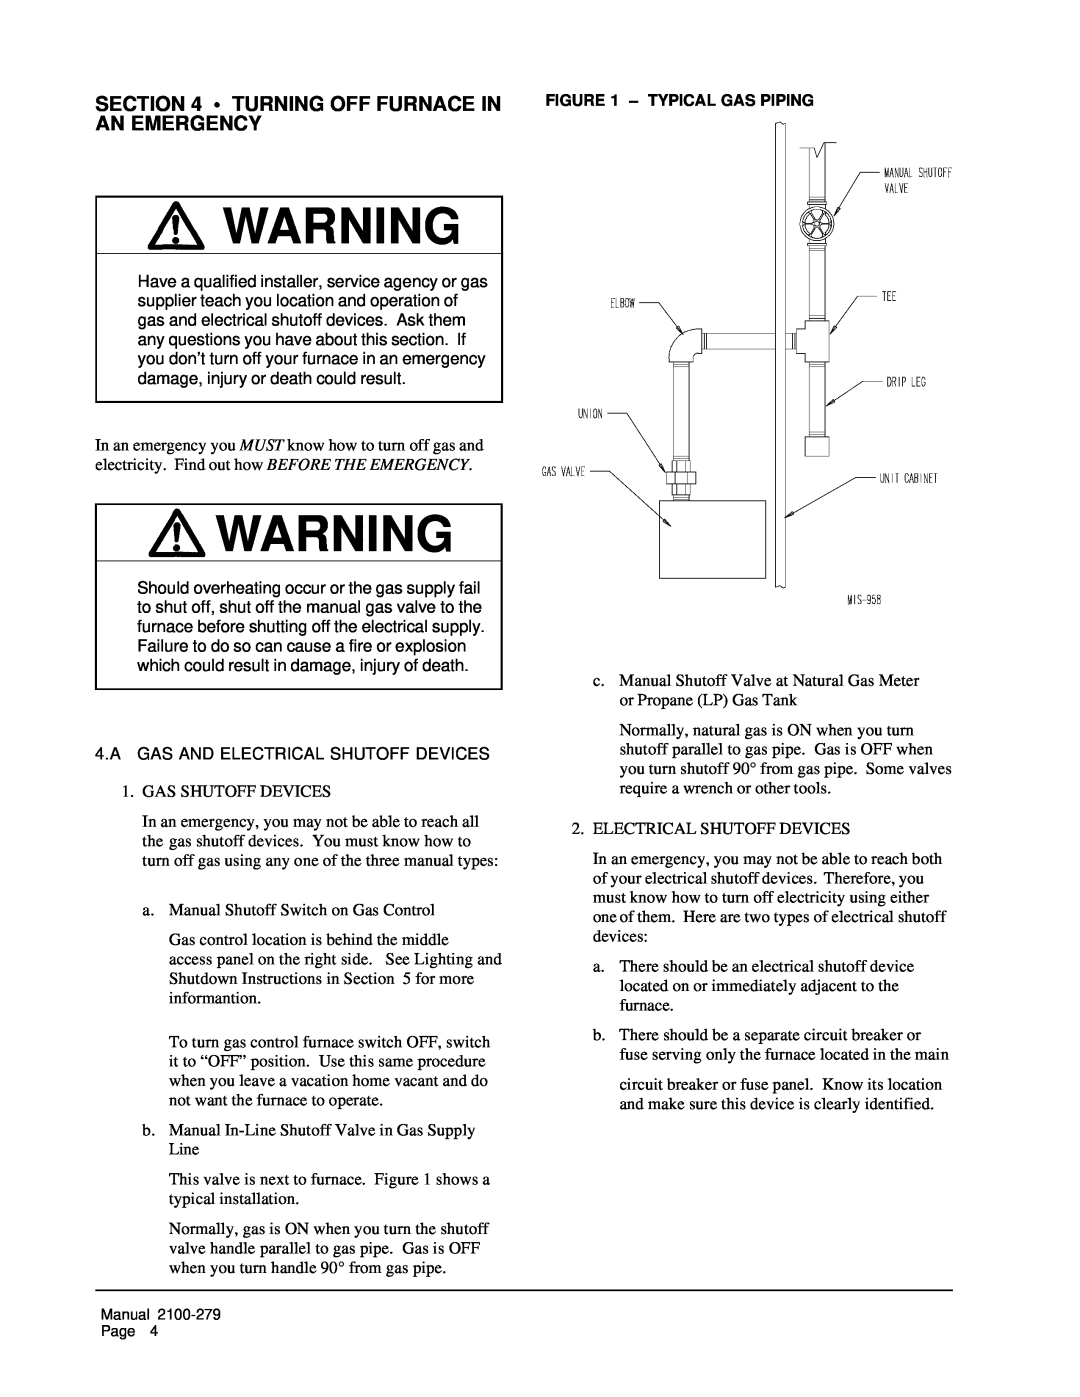 3Com 43506 operating instructions Turning Off Furnace In An Emergency, A Gas And Electrical Shutoff Devices 